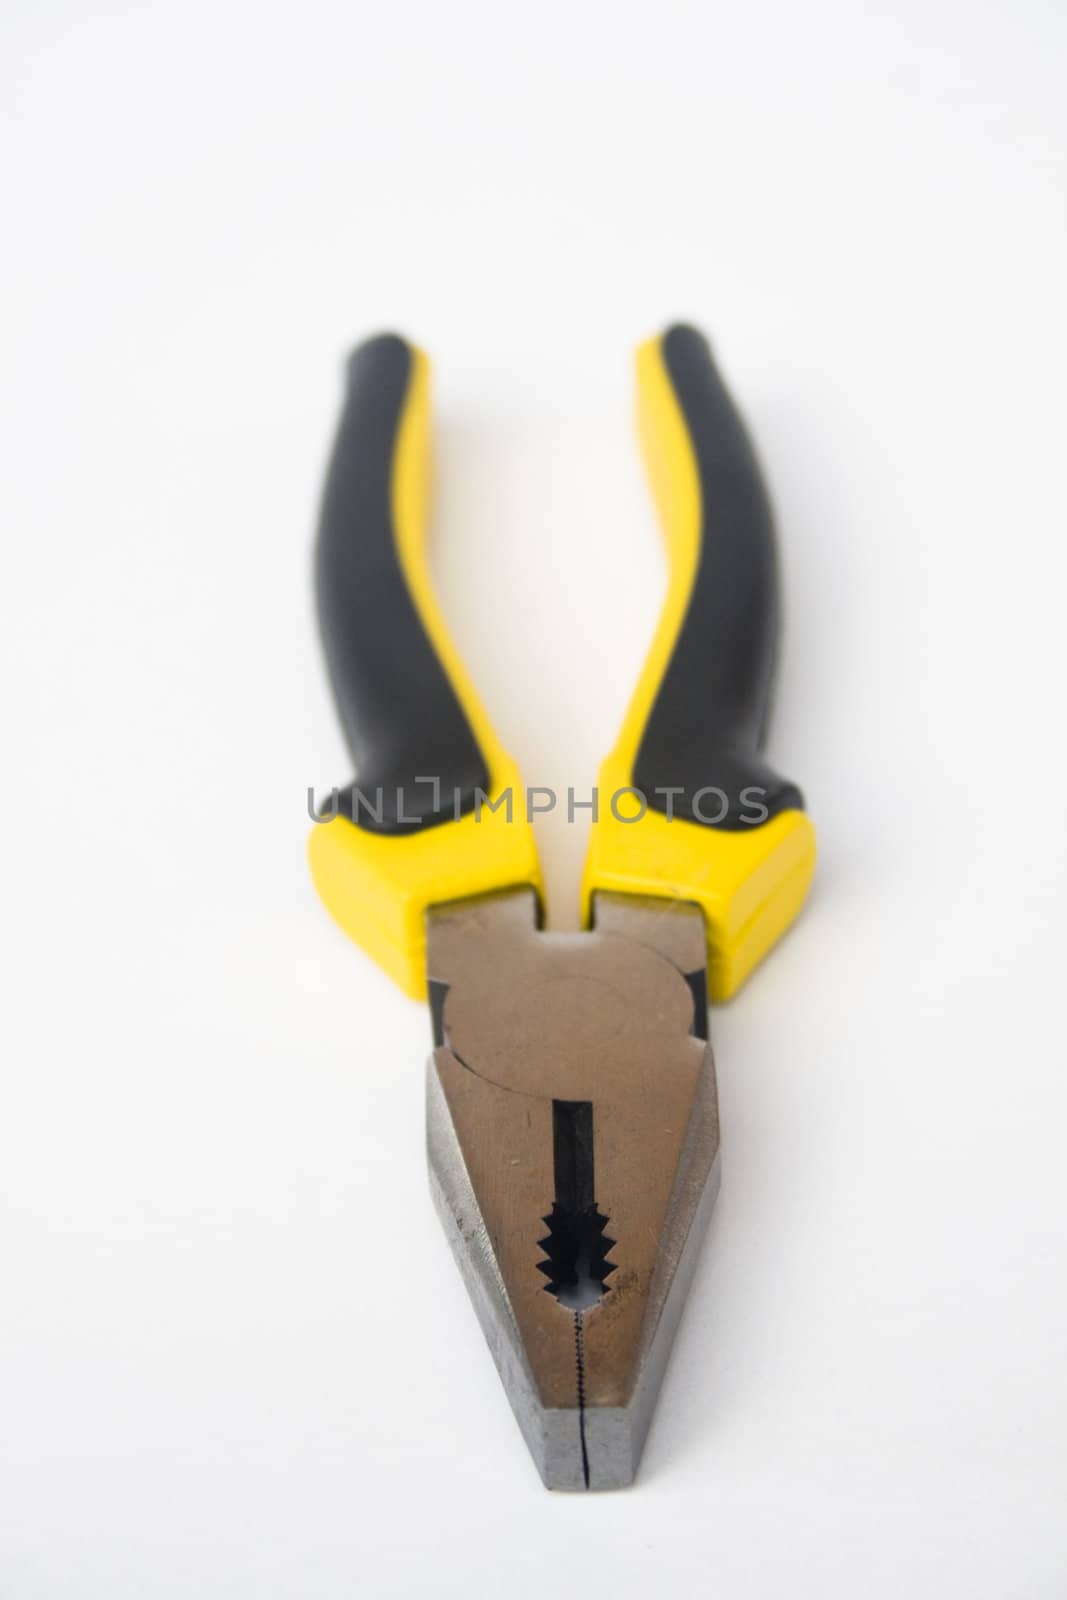 Yellow and black handled blunt nosed pliers on white background